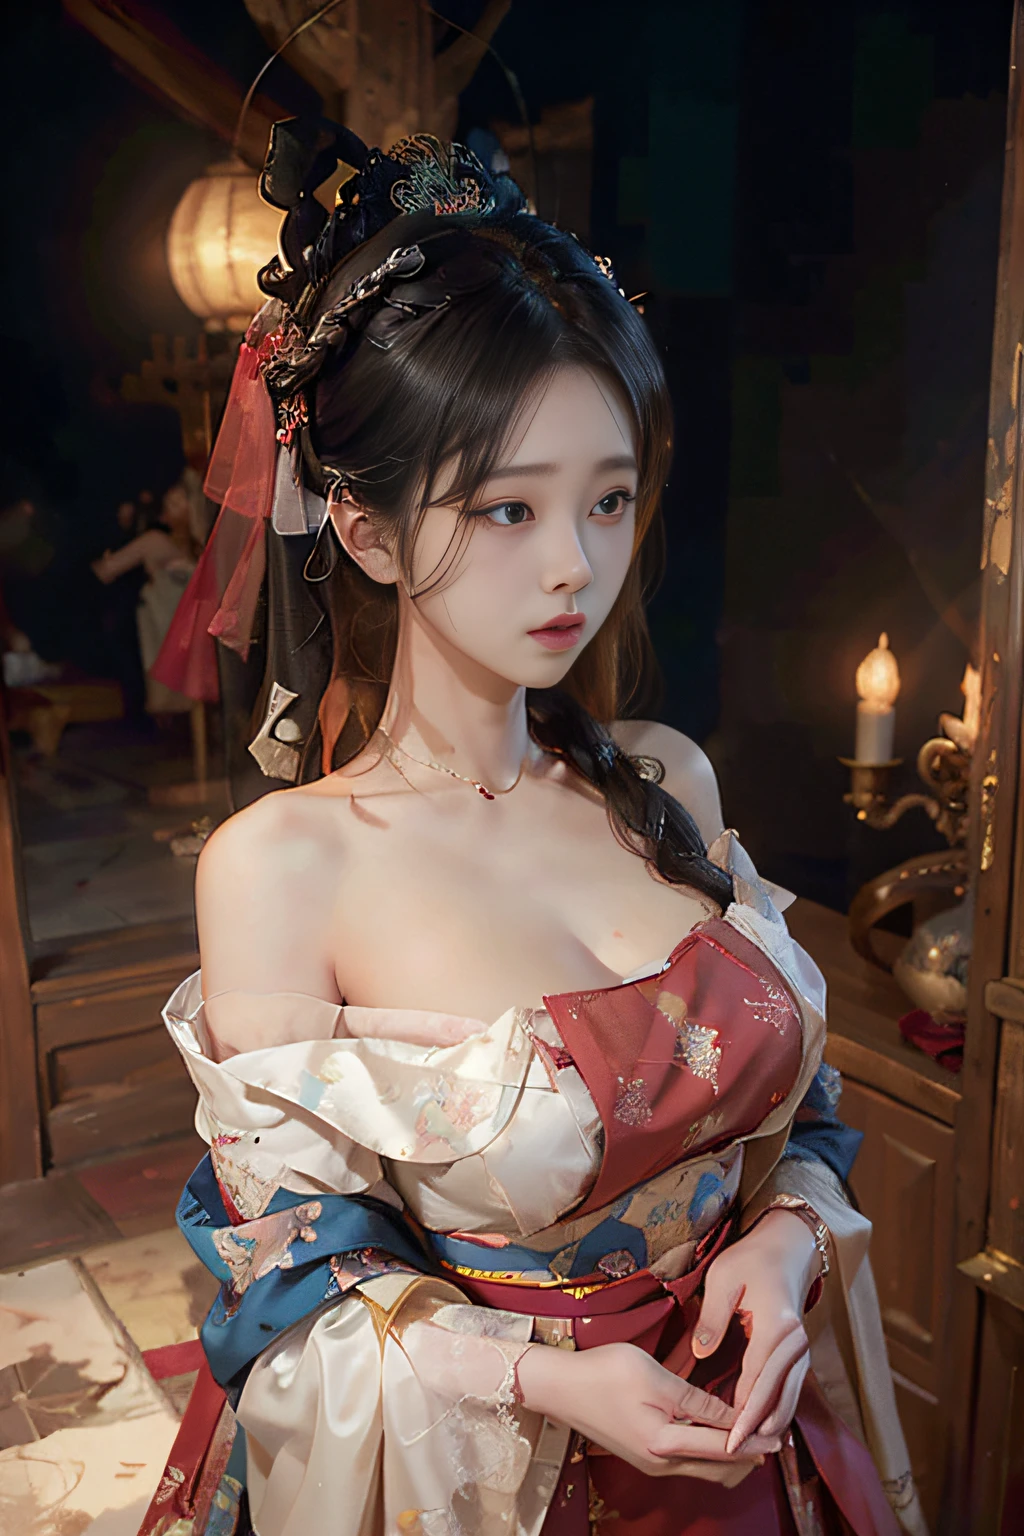 8k, RAW Photo, Best Quality, Masterpiece: 1.2), (Realistic, Photo Realistic: 1.4), {{{1girl}}},, Depth of Field, Full Body, Cinematic Lighting, princess 8 yeald old cute, (huge ，cleavage), Beautiful Facial Features, Beautiful Body, Sweating, , Depth of Field, Skin, Ears, Pale Skin, Best Quality, Masterpiece, Illustration, an extremely deciple and beautiful, extremely detailed,CG,unity,8k wallpaper,amazing,finely detail,master,best quality,official art,extremely detailed CG unity 8k wallpaper,ridiculous,incredibly ridiculous,huge file size, super verbose, high resolution, very verbose, Beautiful detailed girl, very detailed eyes and face, beautiful detailed eyes, light on face, (Hanfu: 1.1), lace silk thin, petticoat